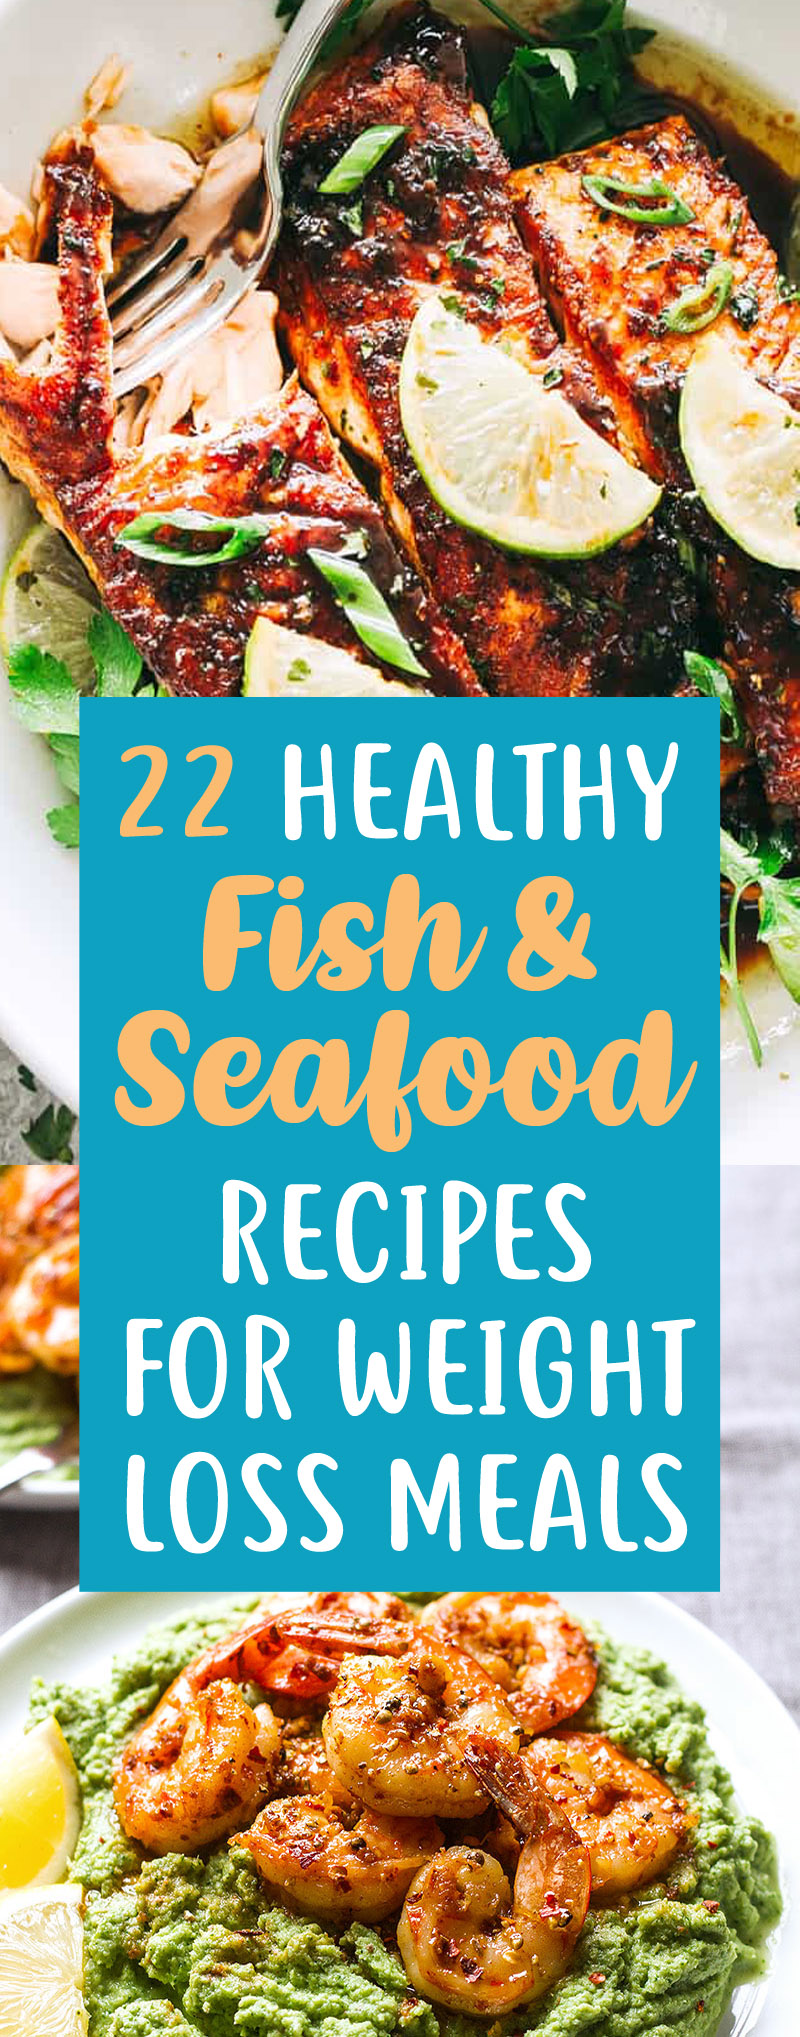 22 Fish & Seafood Recipes That Make An Easy Delicious Weight Loss Dinner! -  TrimmedandToned